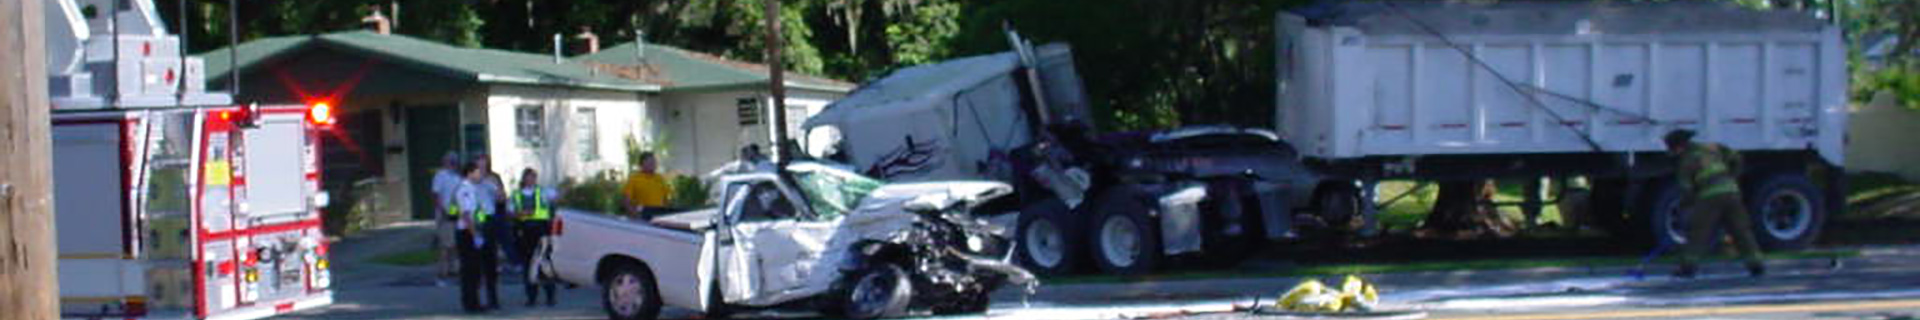 truck and tractor trailer crash site